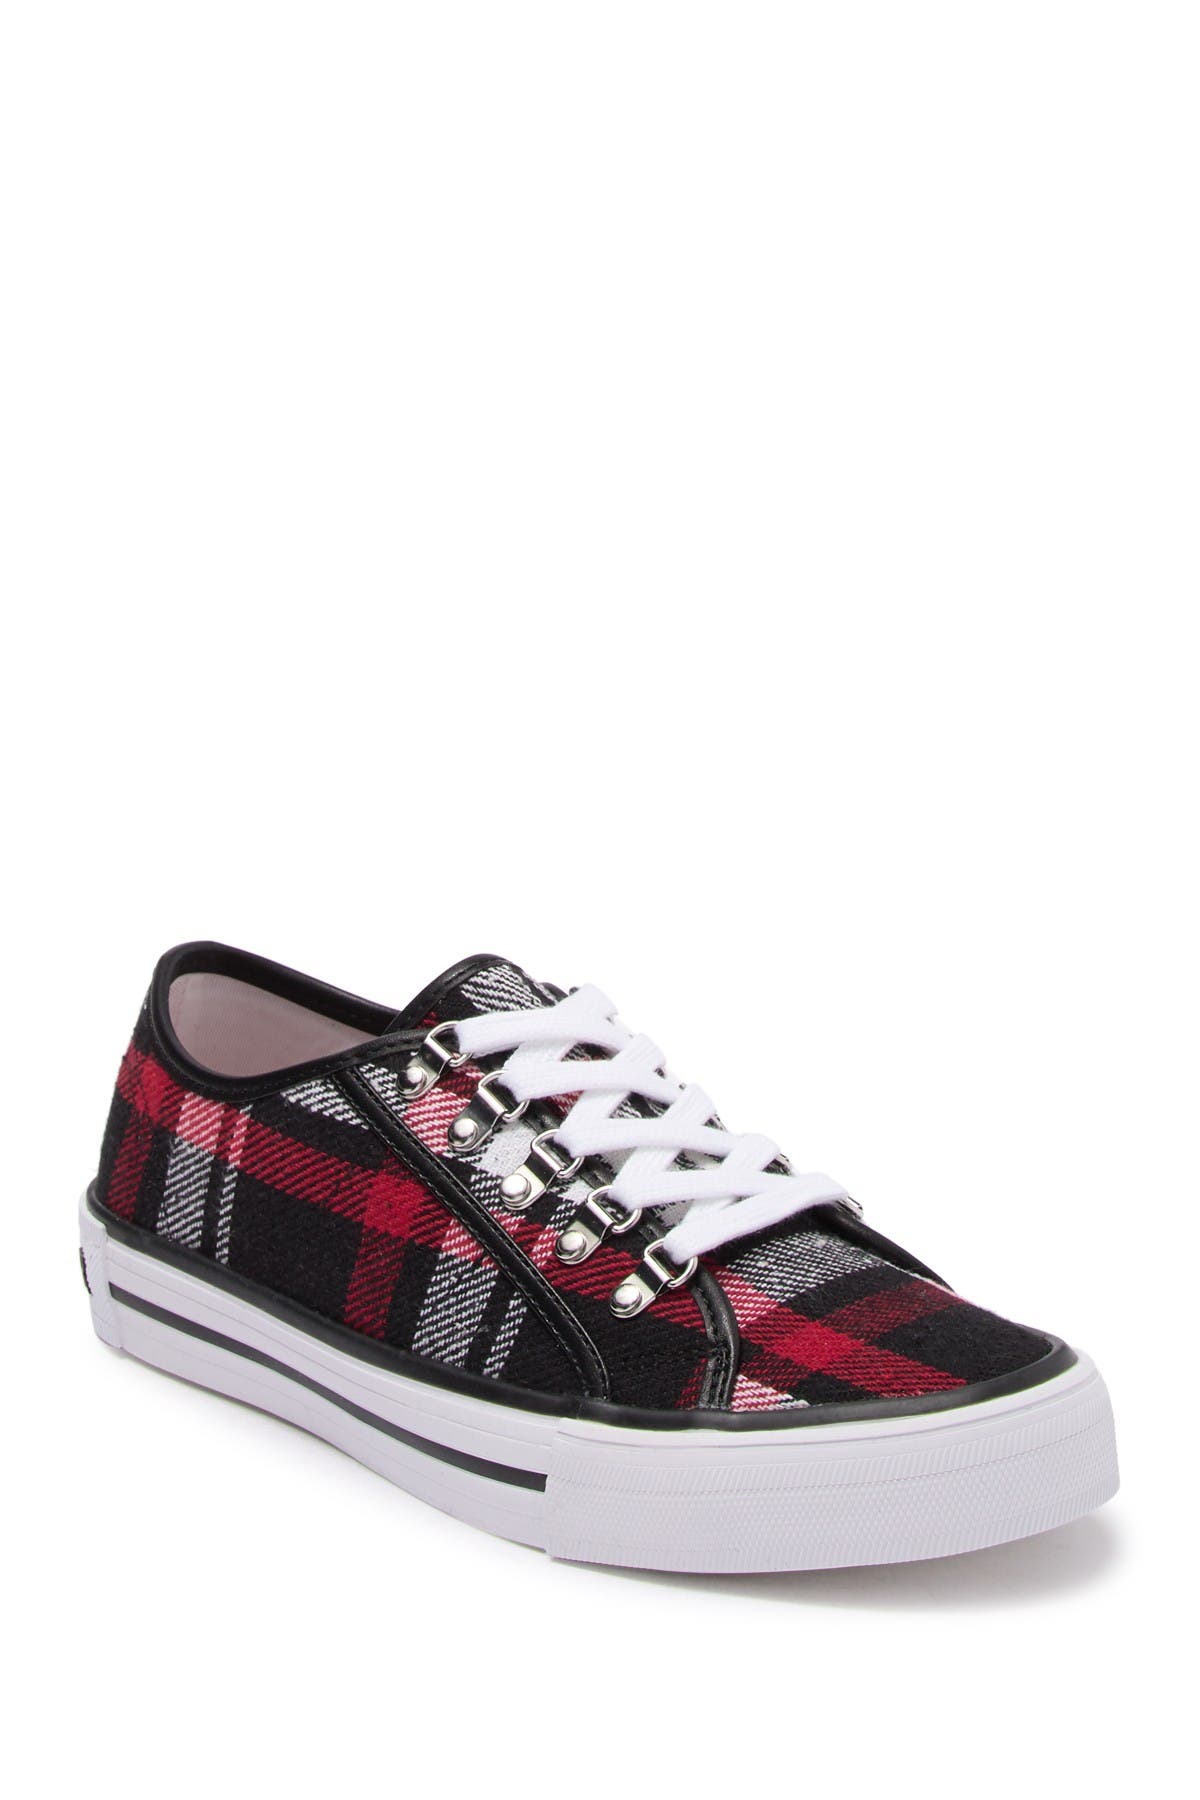 tommy hill sneakers